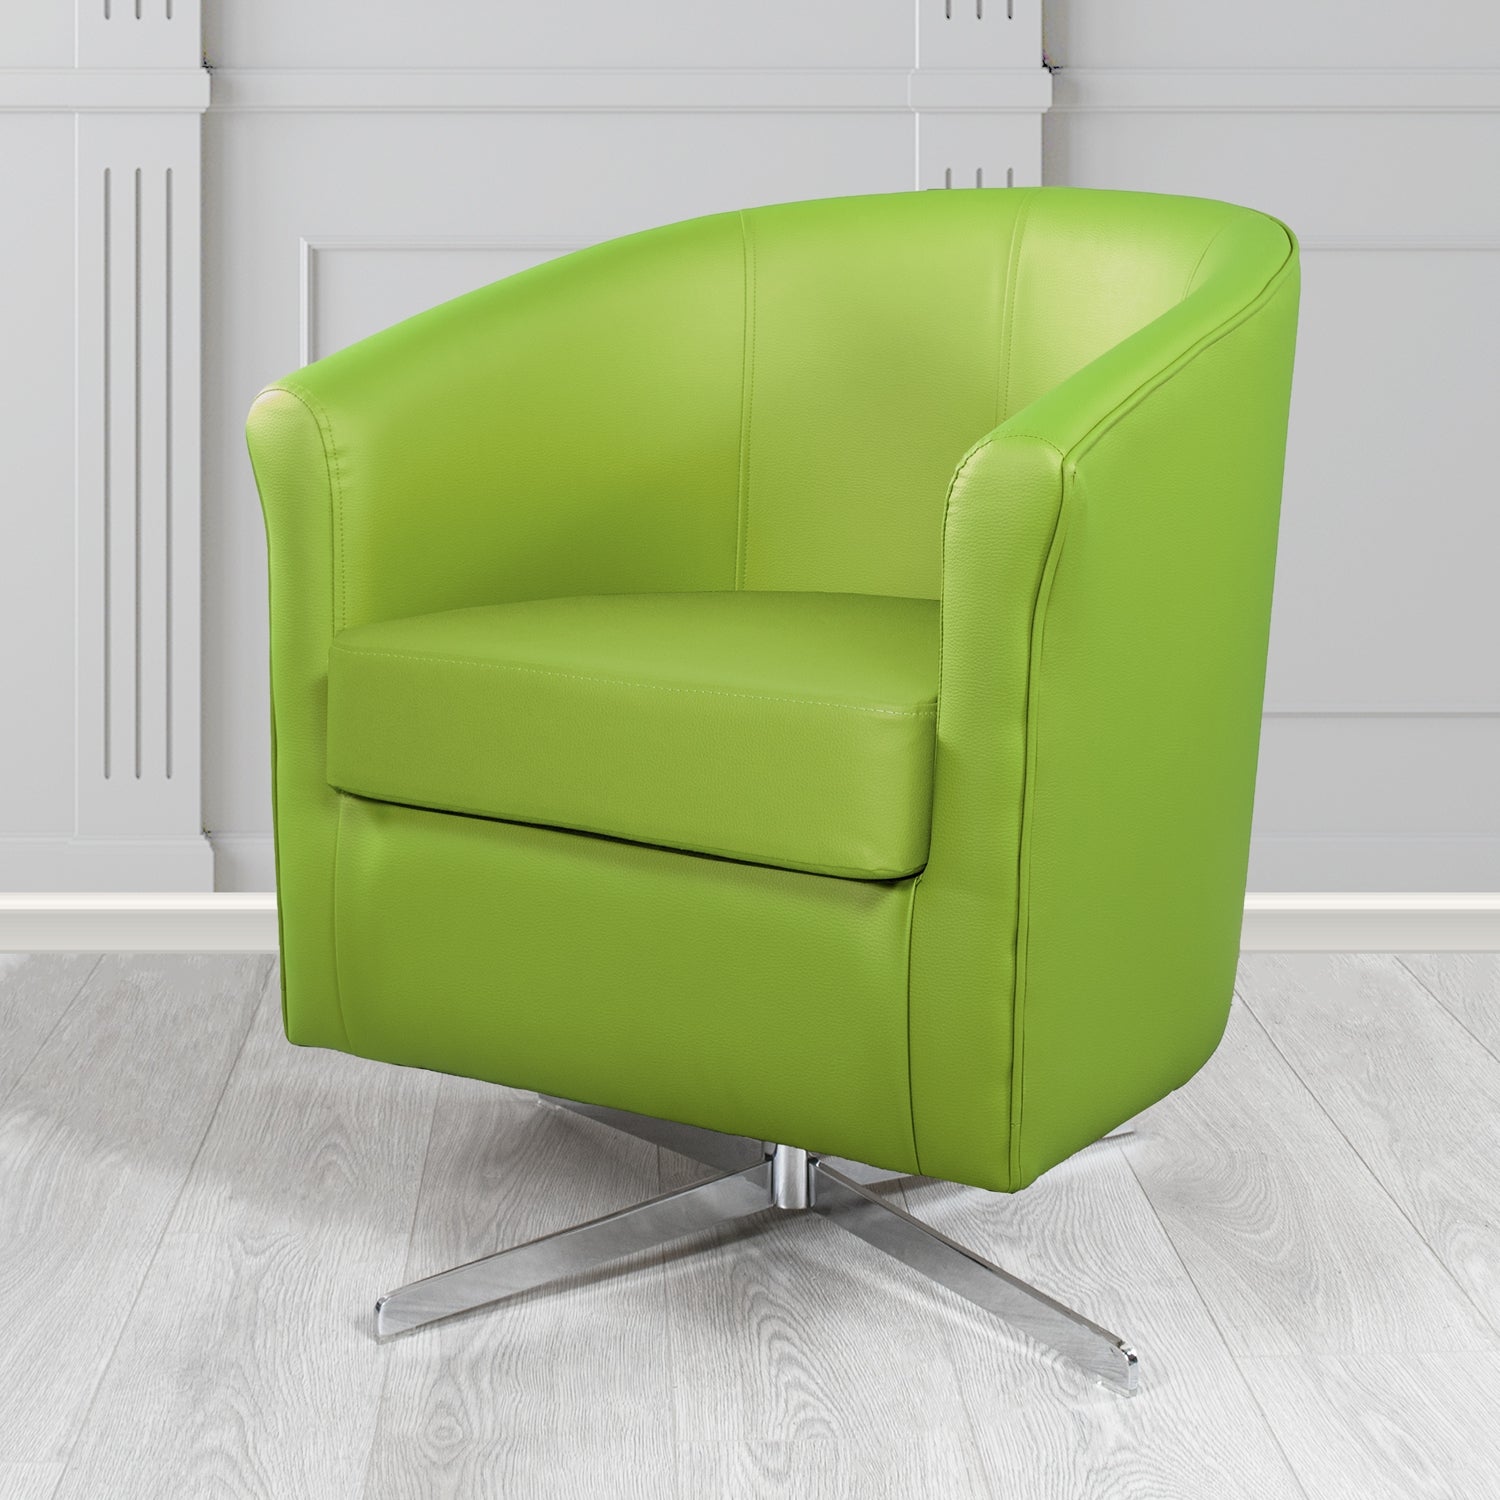 Cannes Swivel Tub Chair in Just Colour Citrus Green Crib 5 Faux Leather